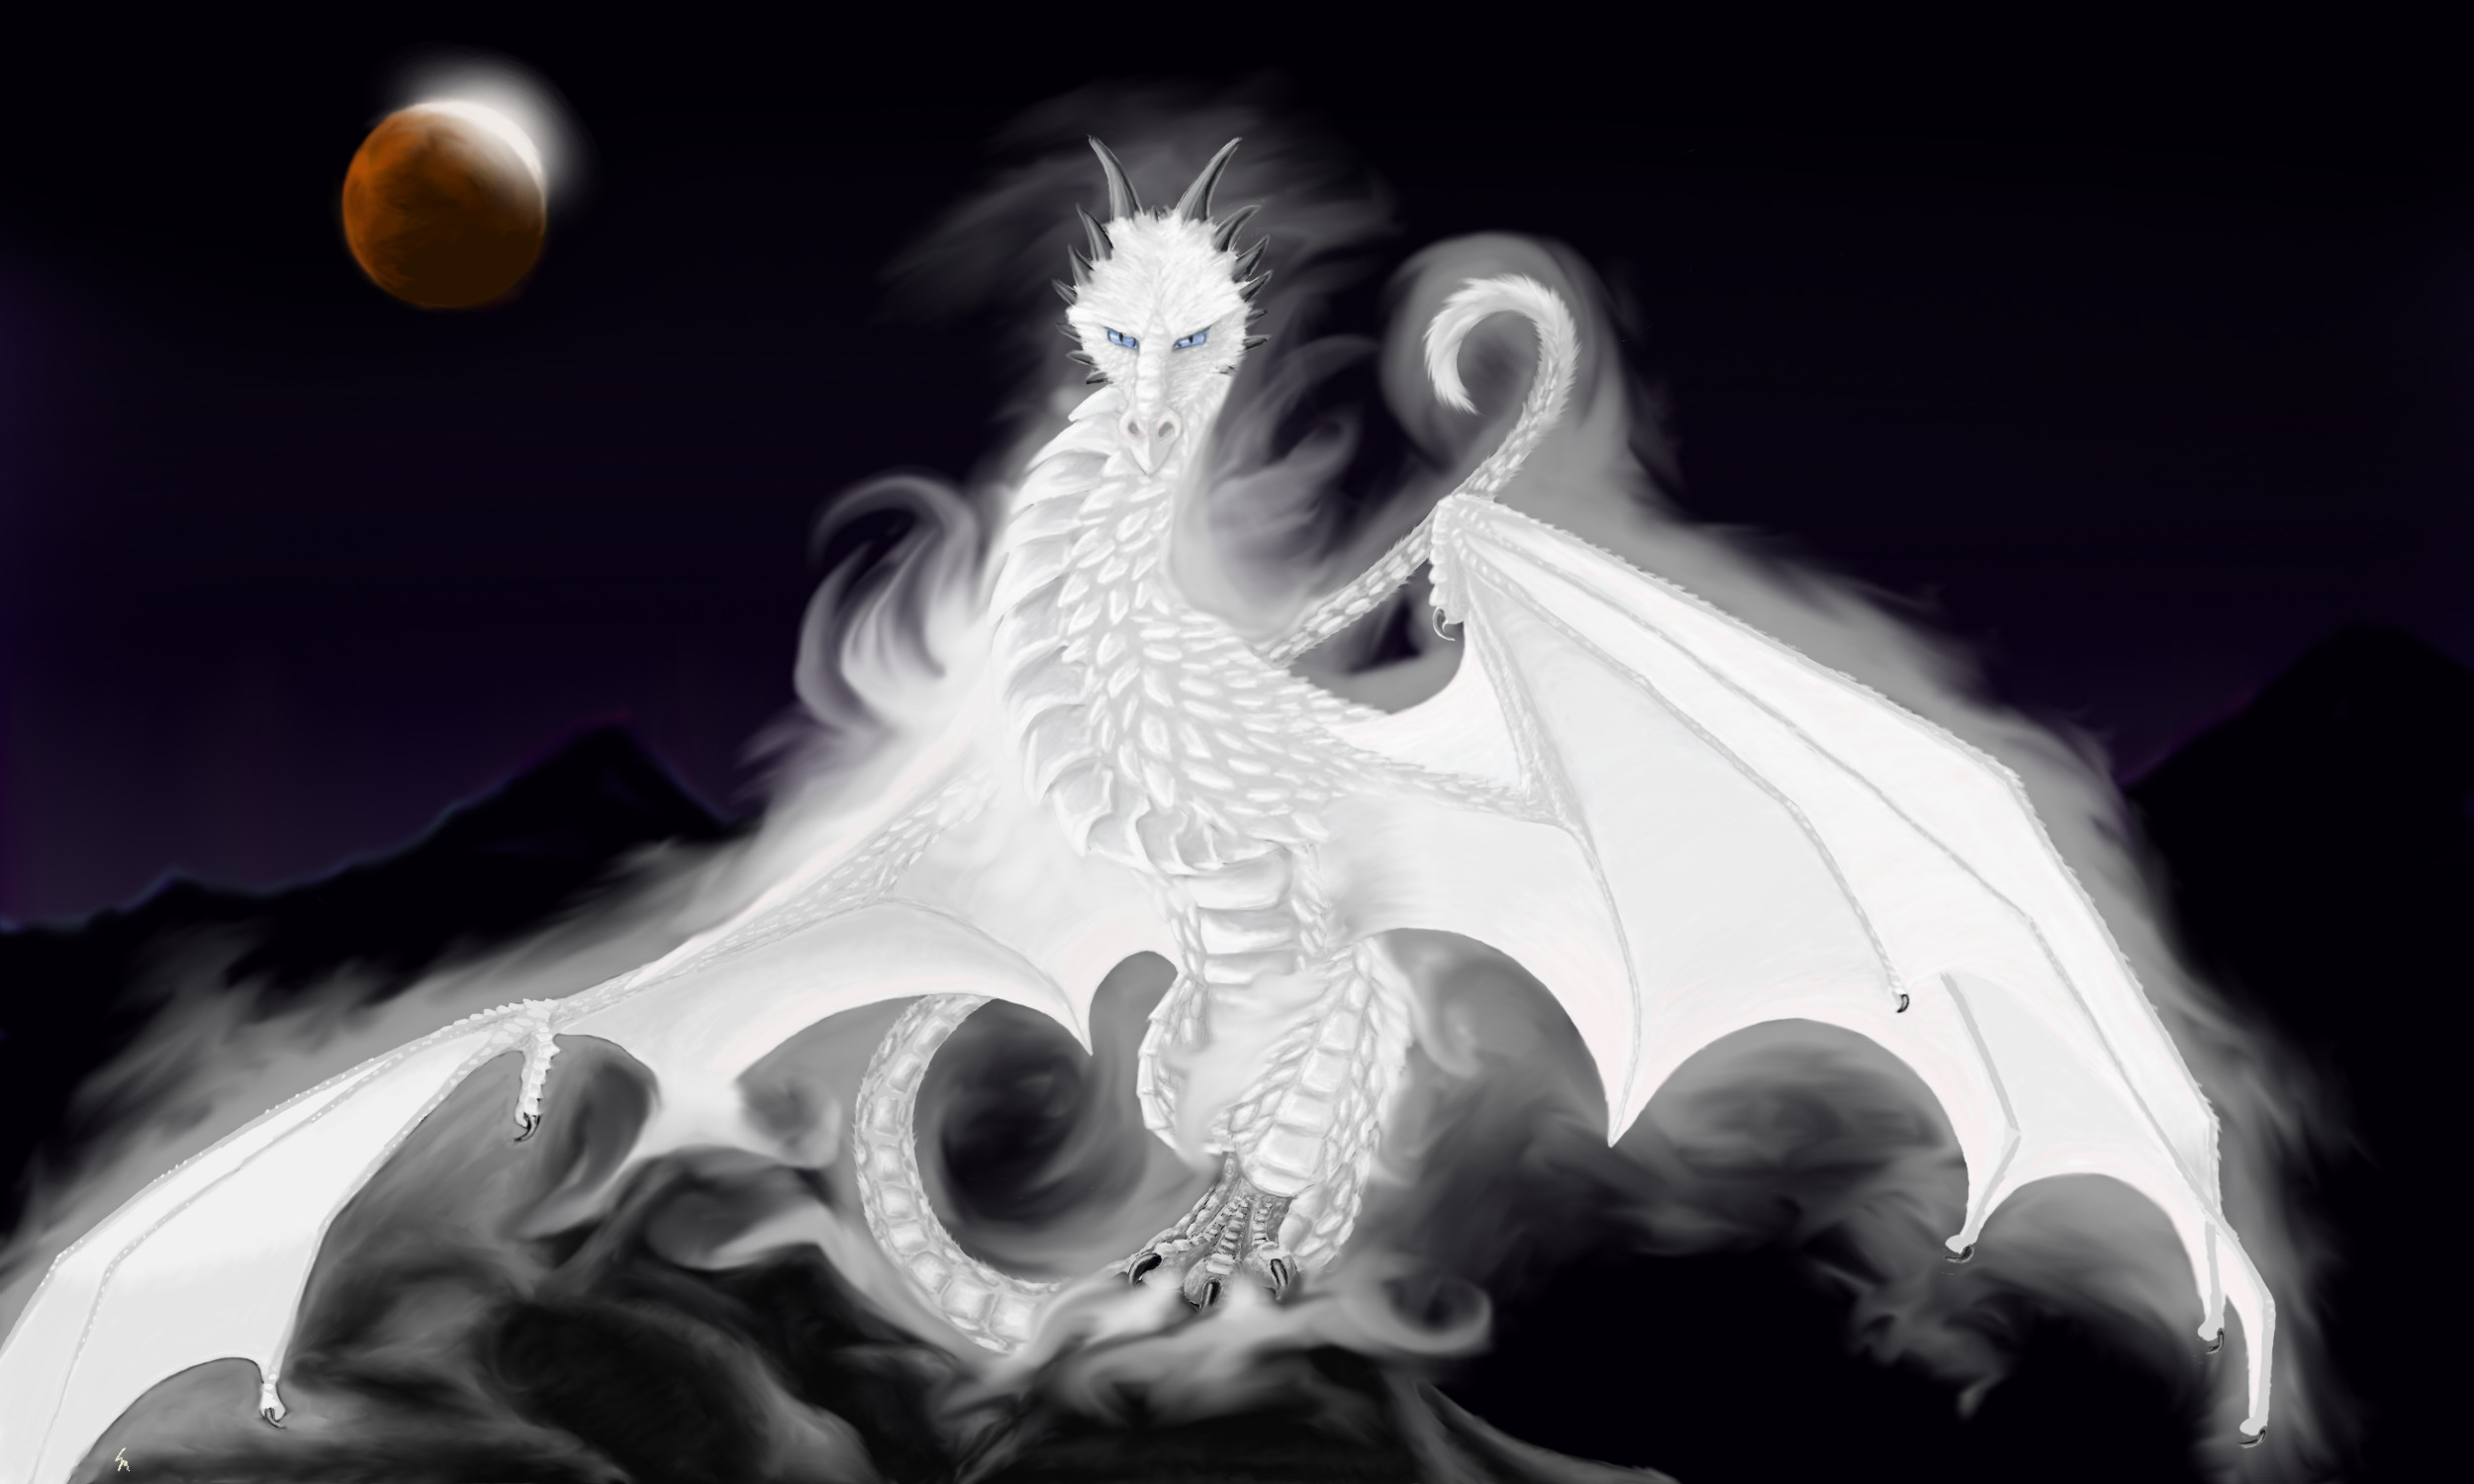 Black and White Dragon Wallpaper (67+ images)